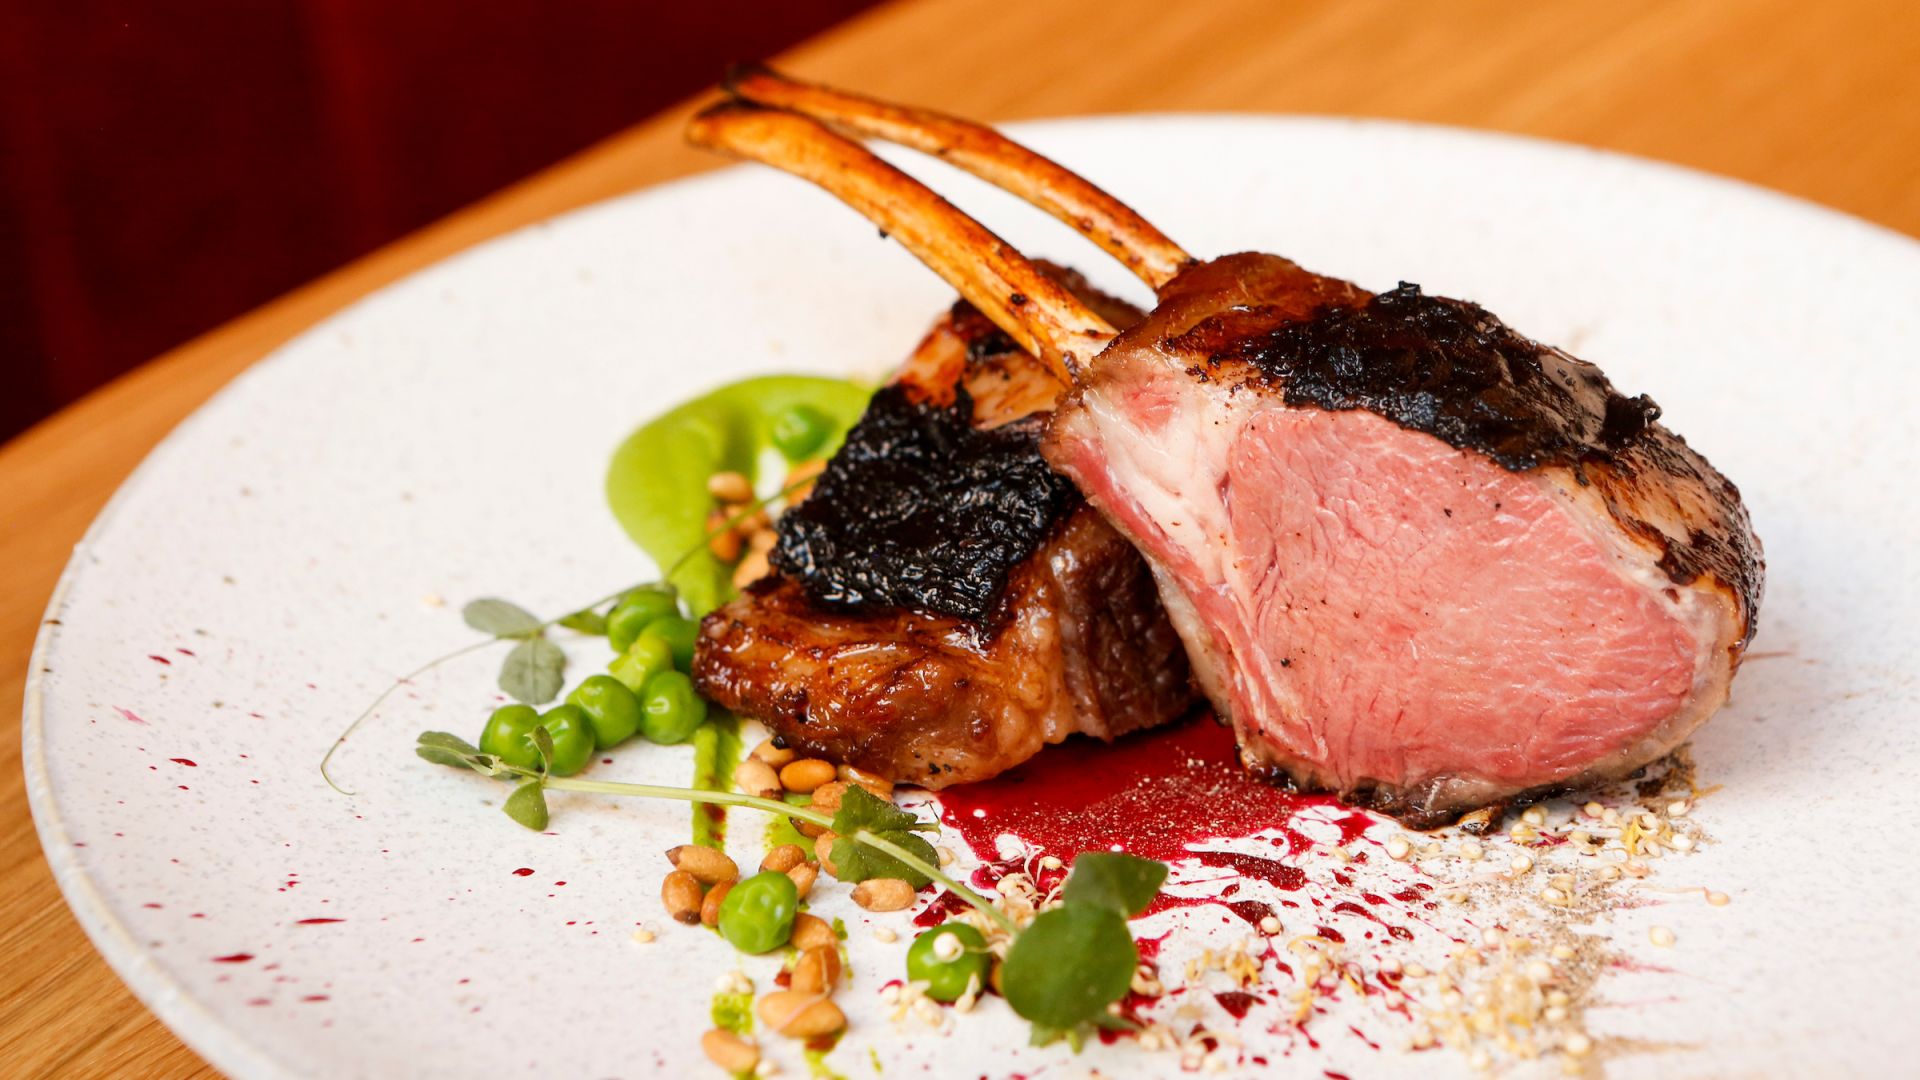 Urban Farmer's Plated Frenched Rack of Lamb